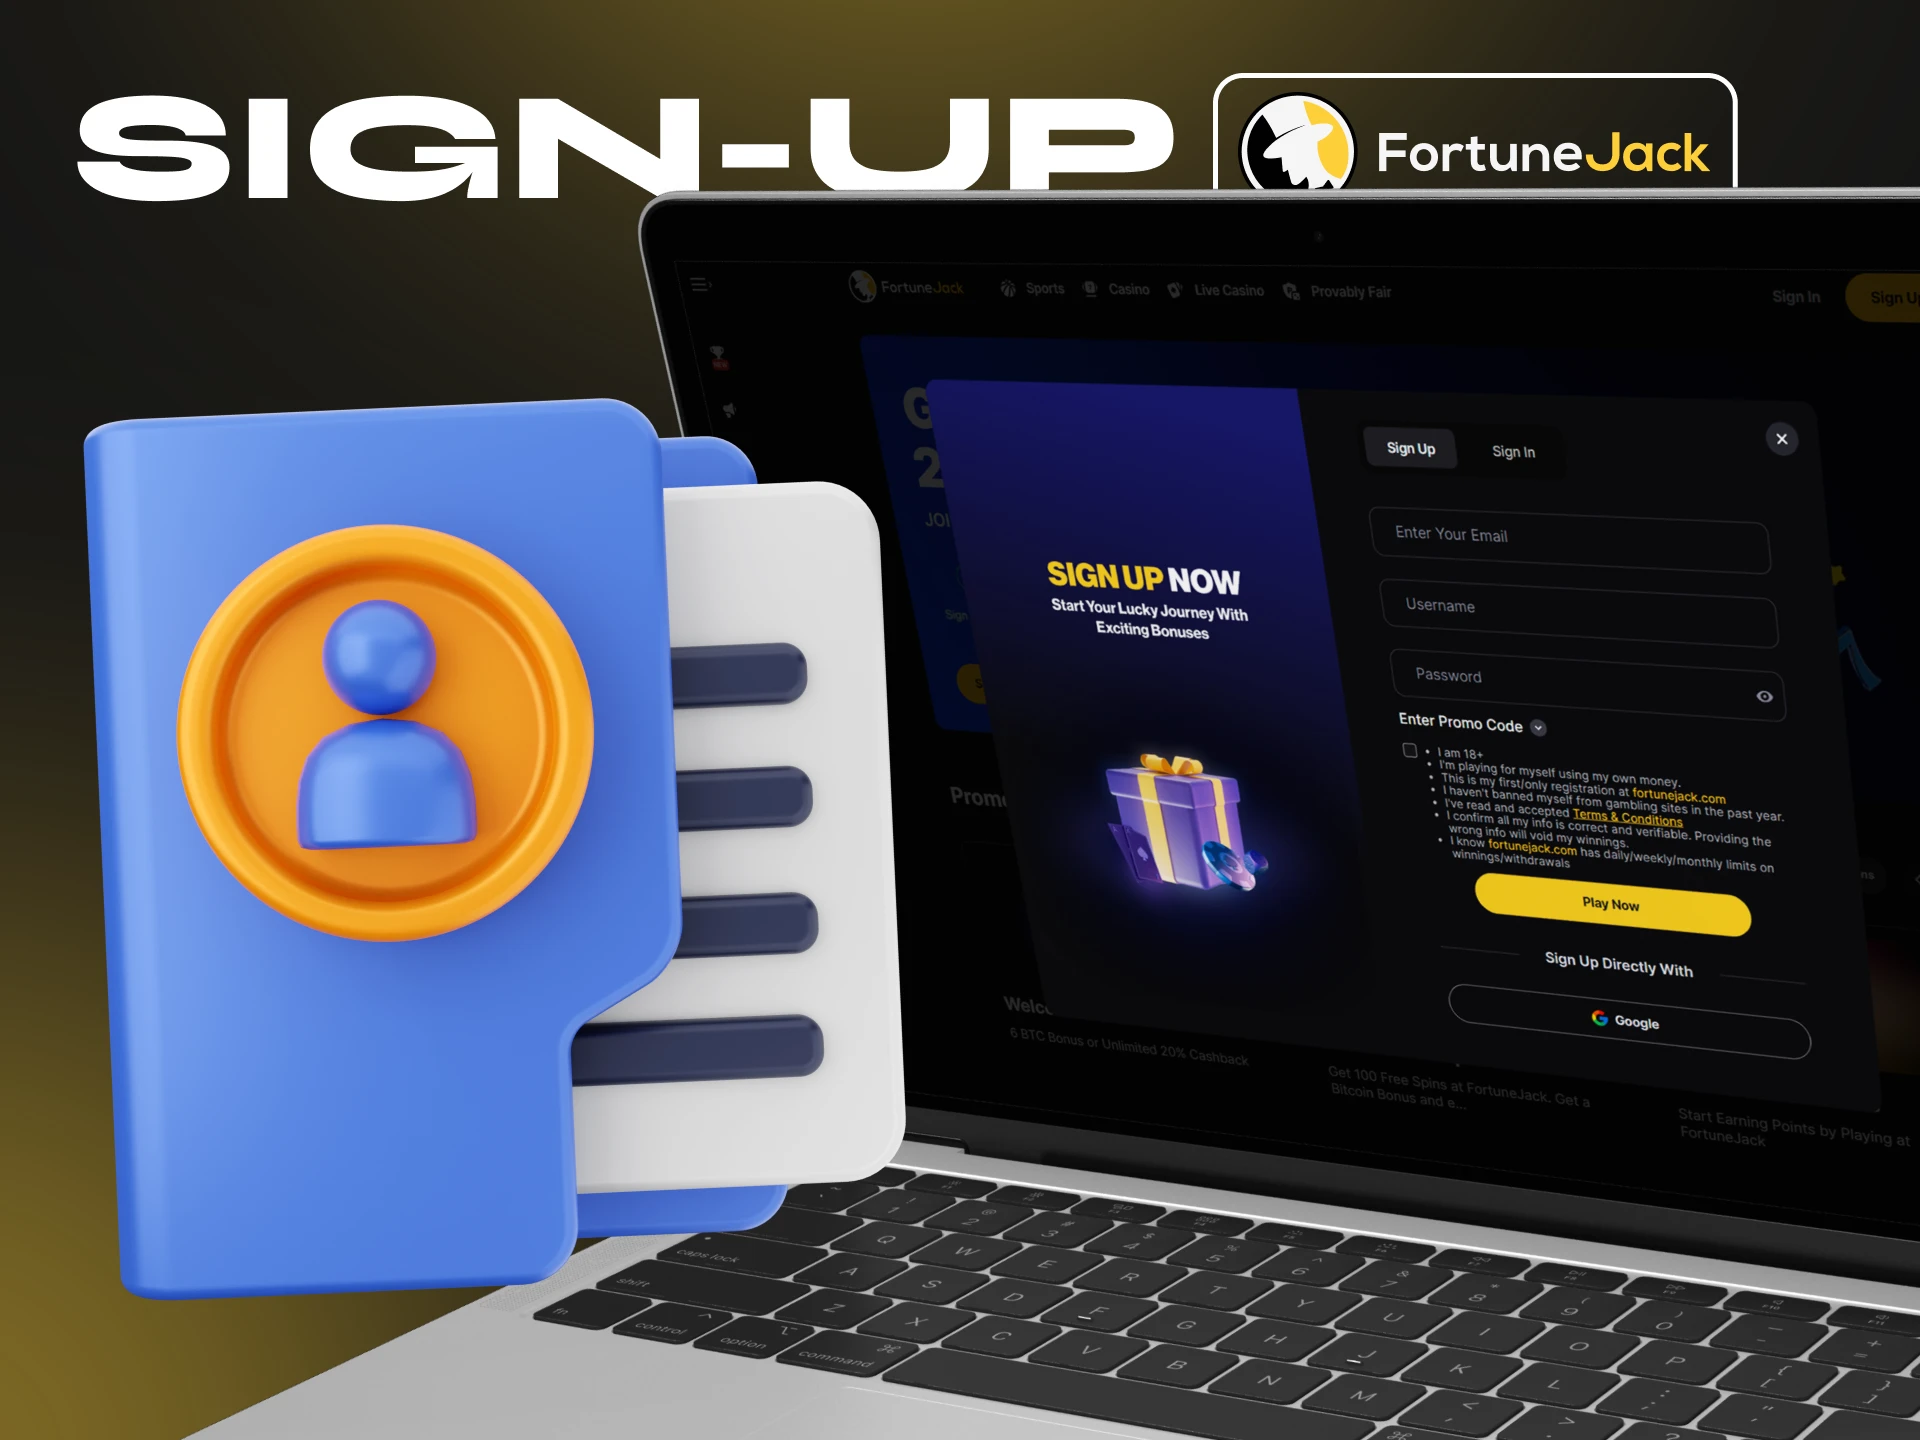 There are different ways to register at FortuneJack Casino.